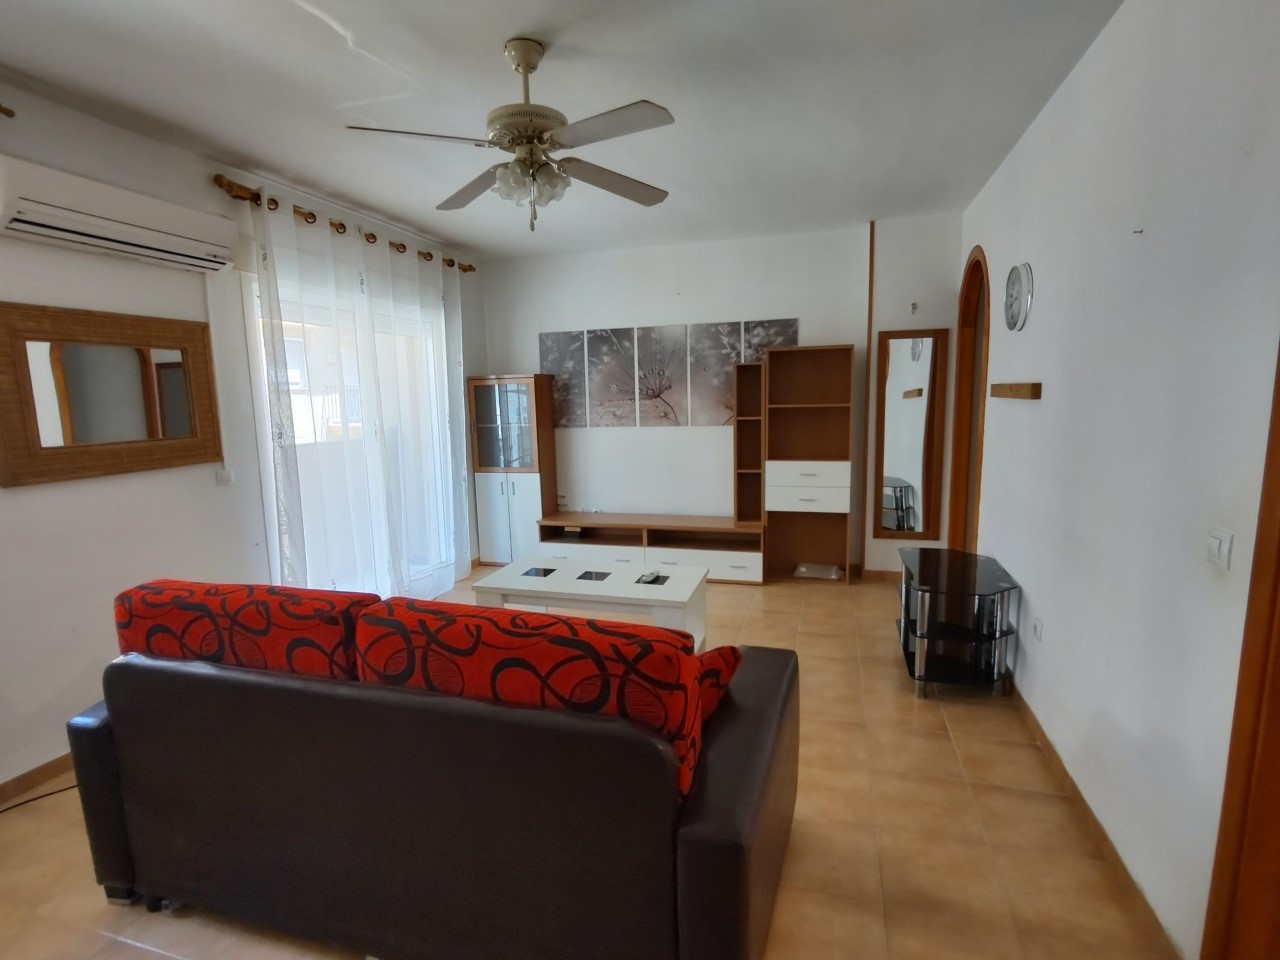 m2001-Bright two bedroom apartment in Turre.